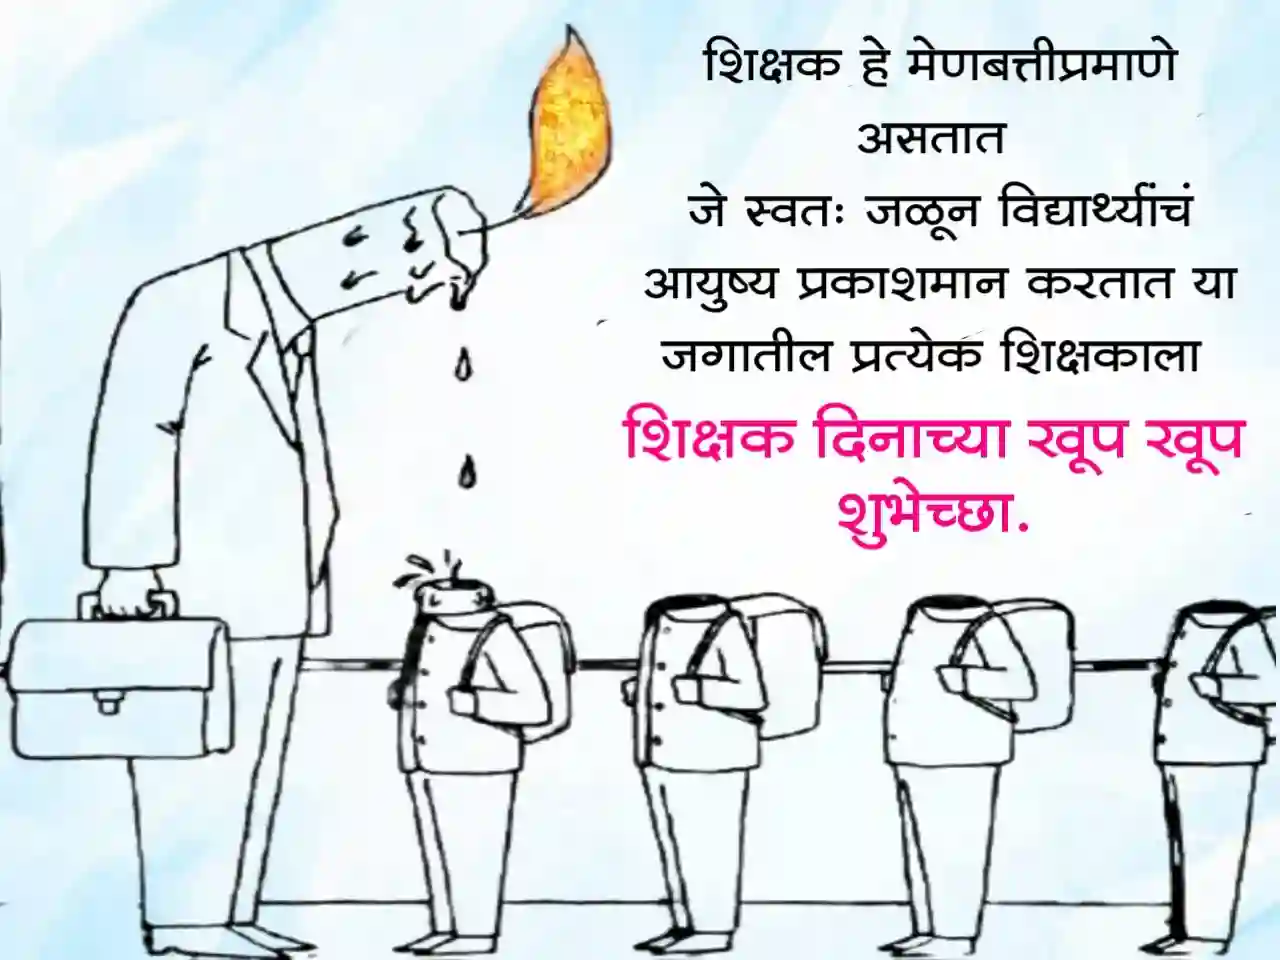 Teachers day images in marathi